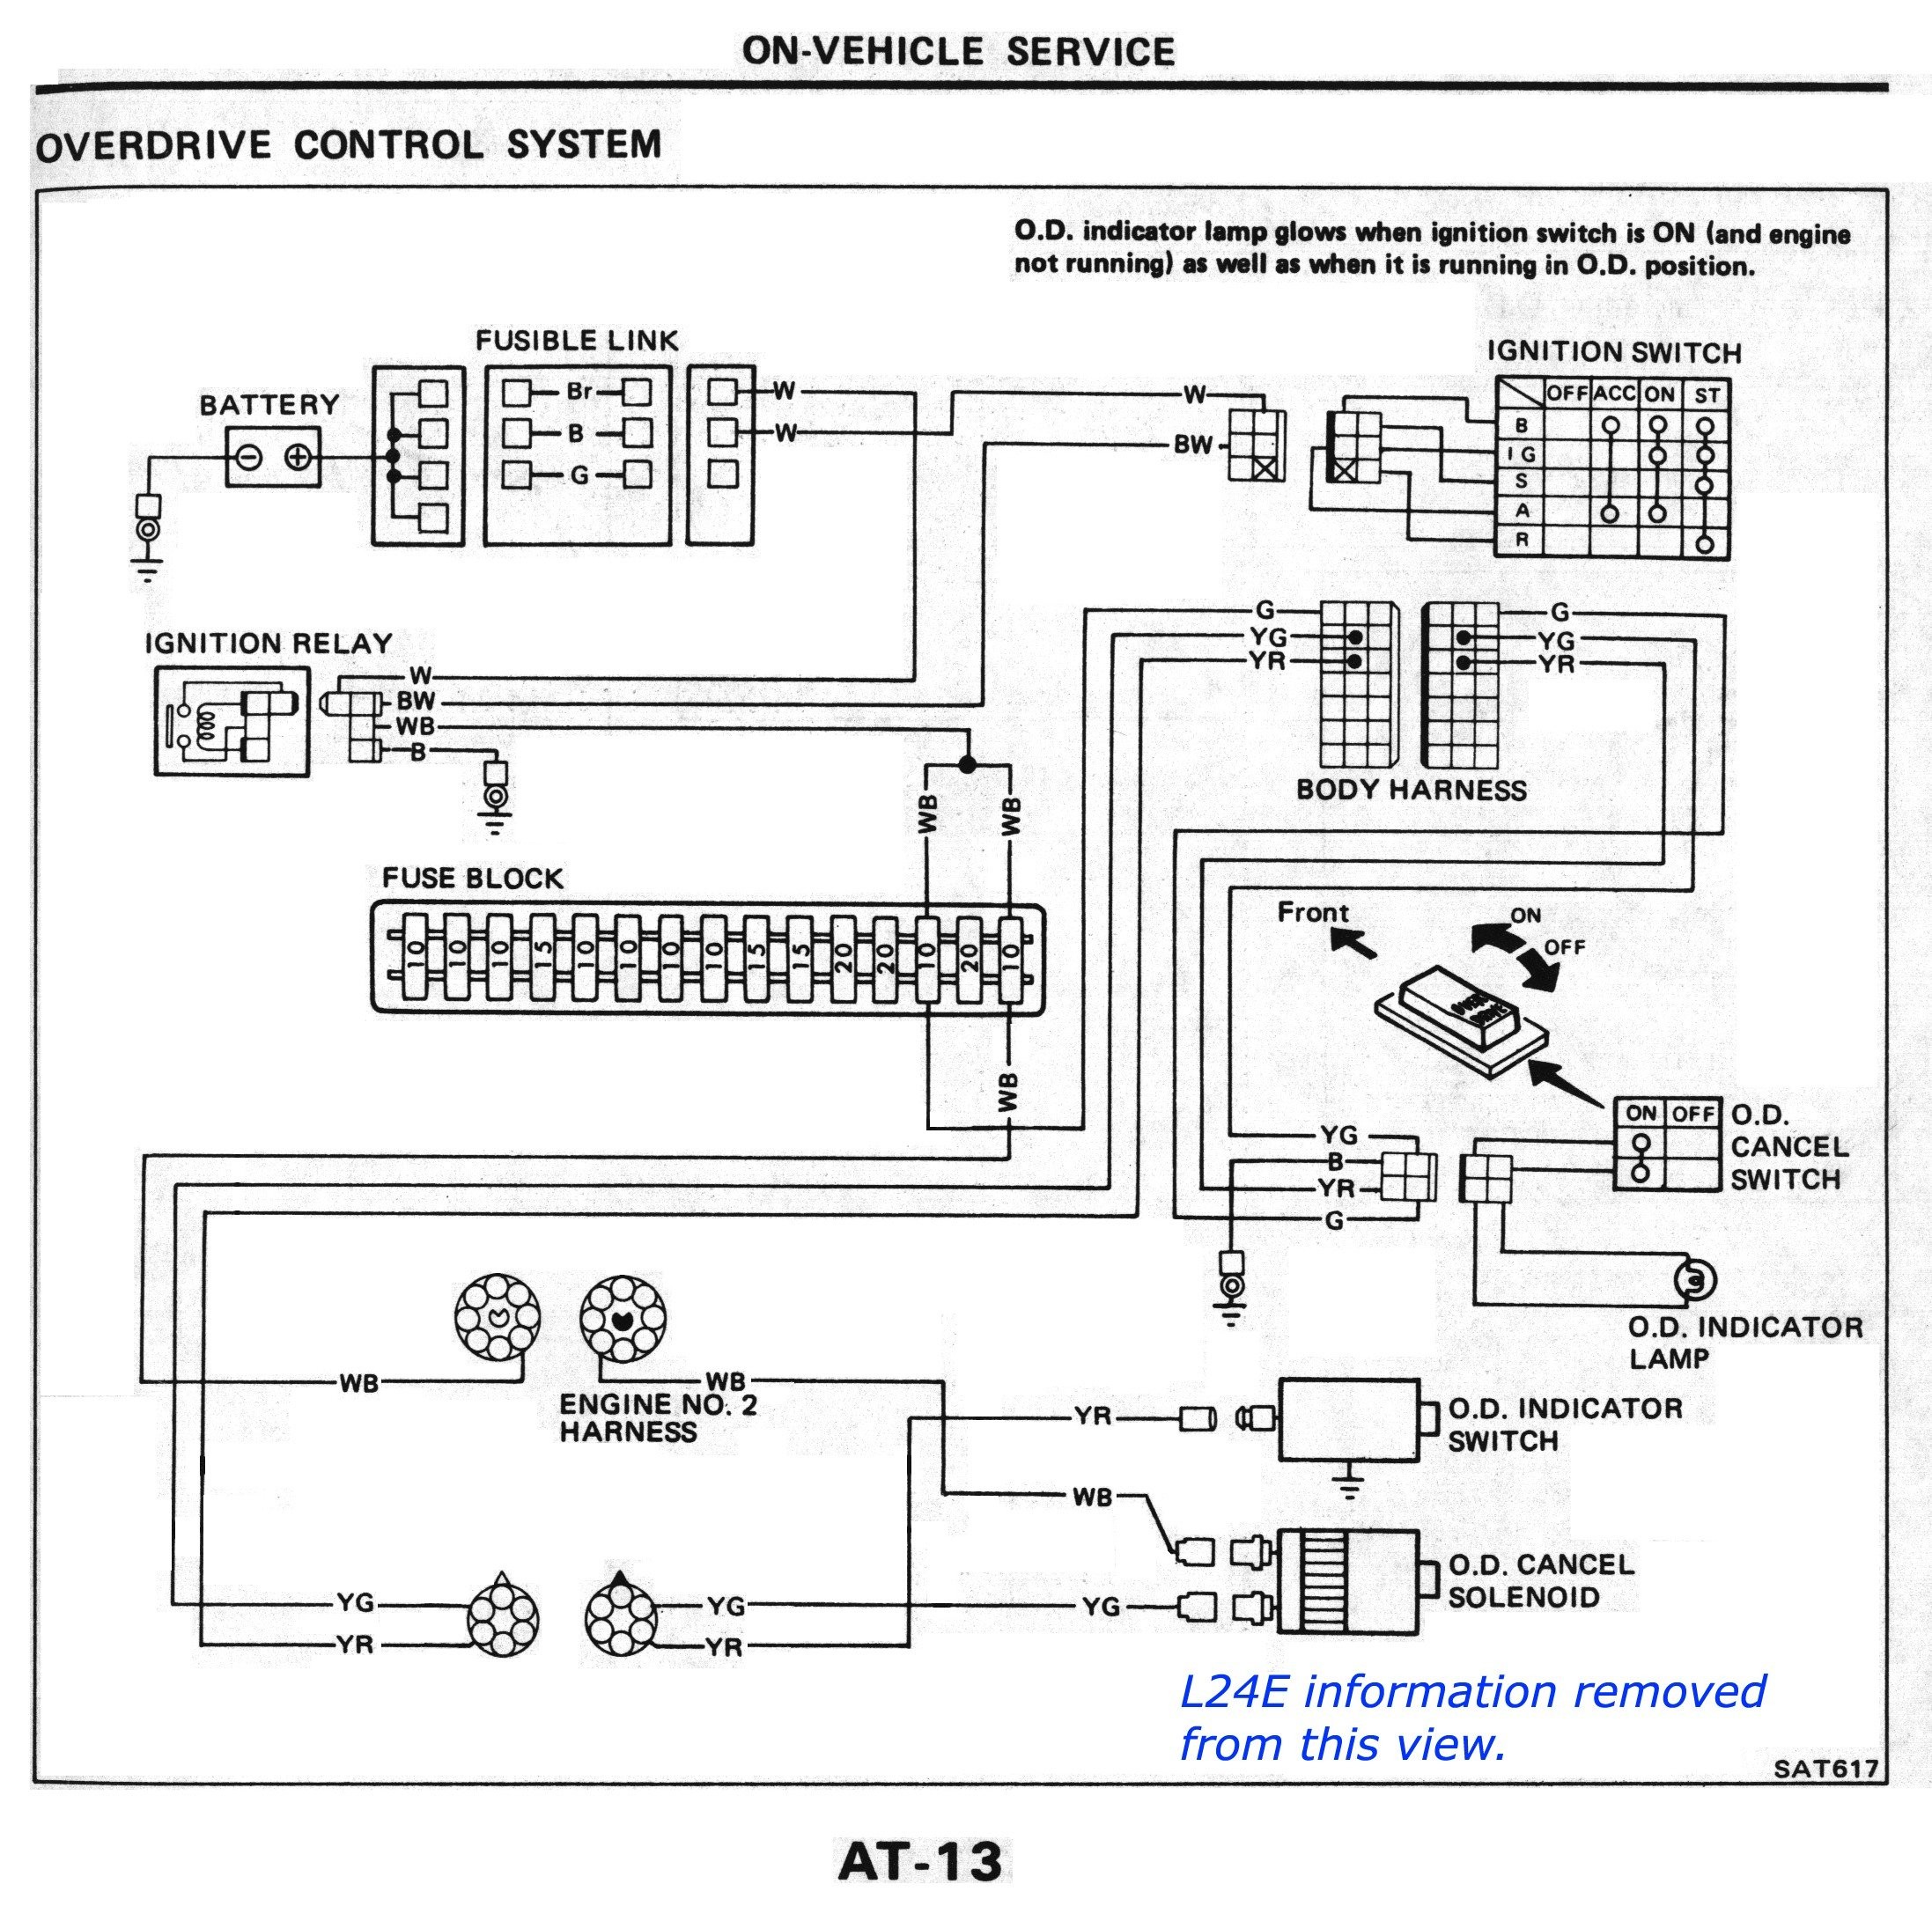 End Line Switch Wiring Diagram Beautiful Nissan sel forums • View topic L4n71b Od at 1983